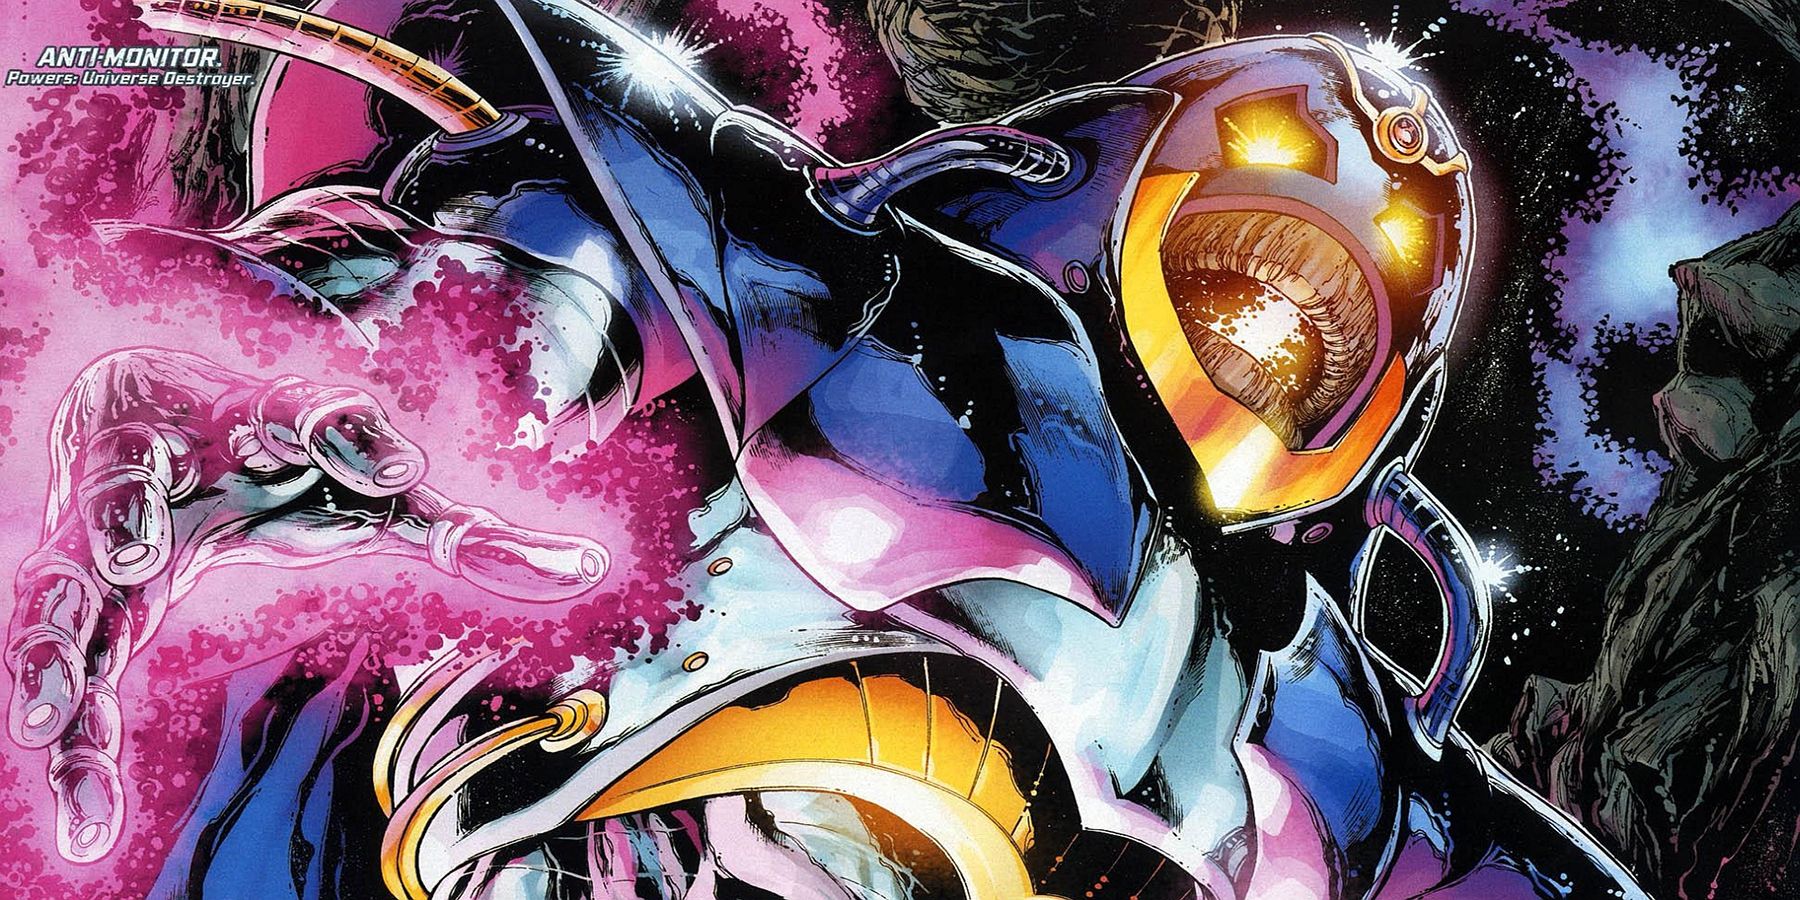 The Anti-Monitor strikes an ominous pose in DC Comics